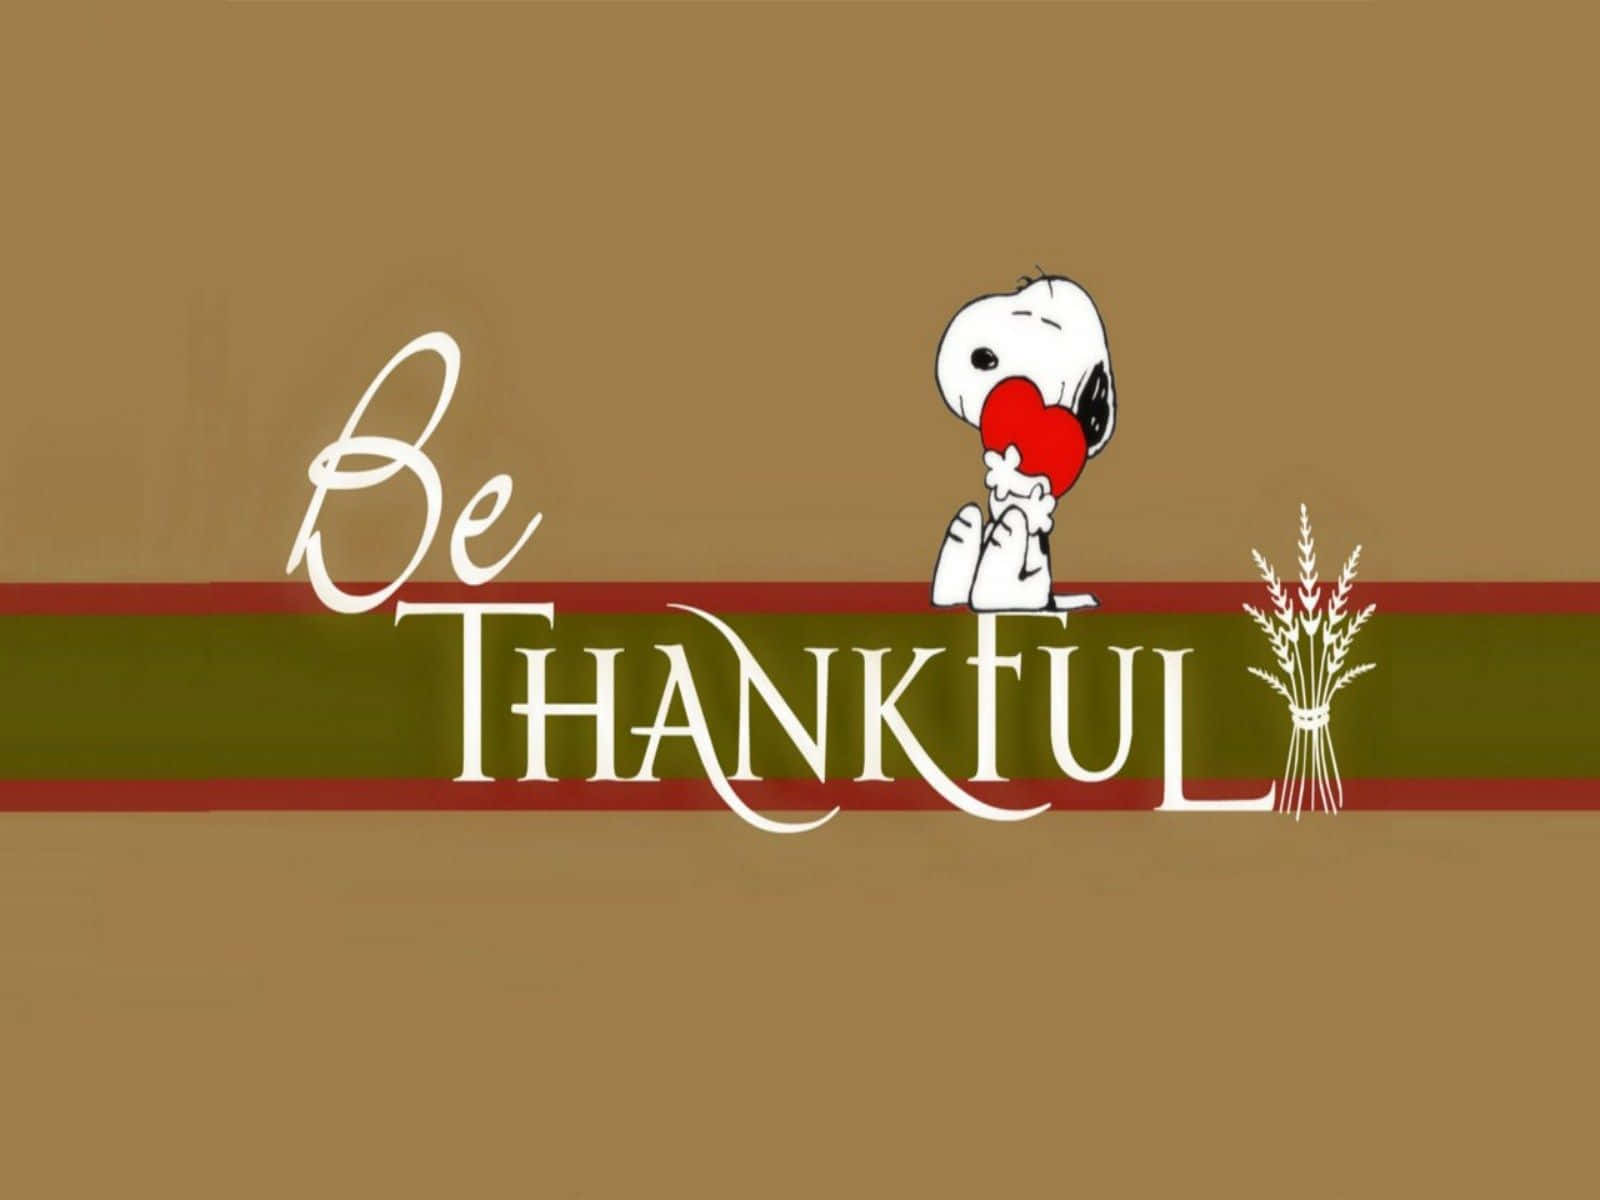 Be Thankful Wallpapers